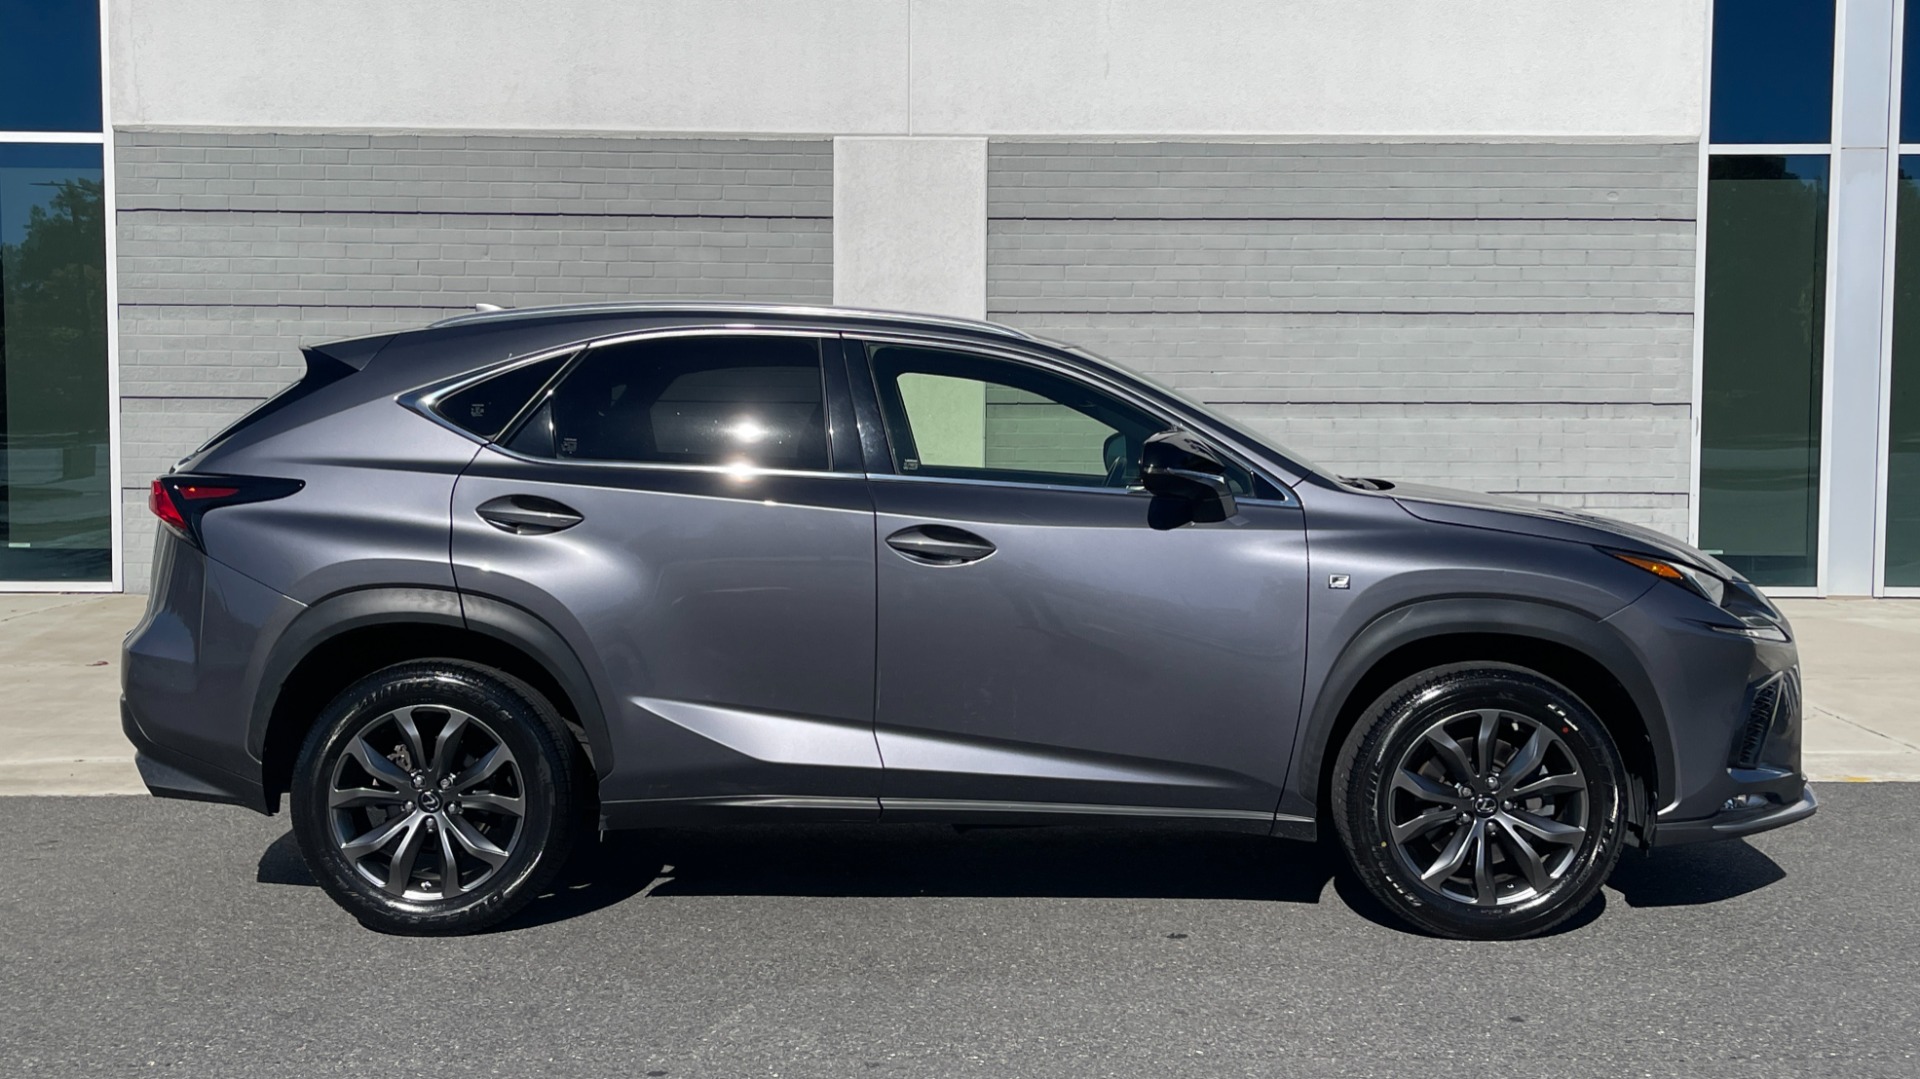 Used 2019 Lexus NX 300 F SPORT / 2.0L TURBO / FWD / LEATHER / REARVIEW for sale Sold at Formula Imports in Charlotte NC 28227 6